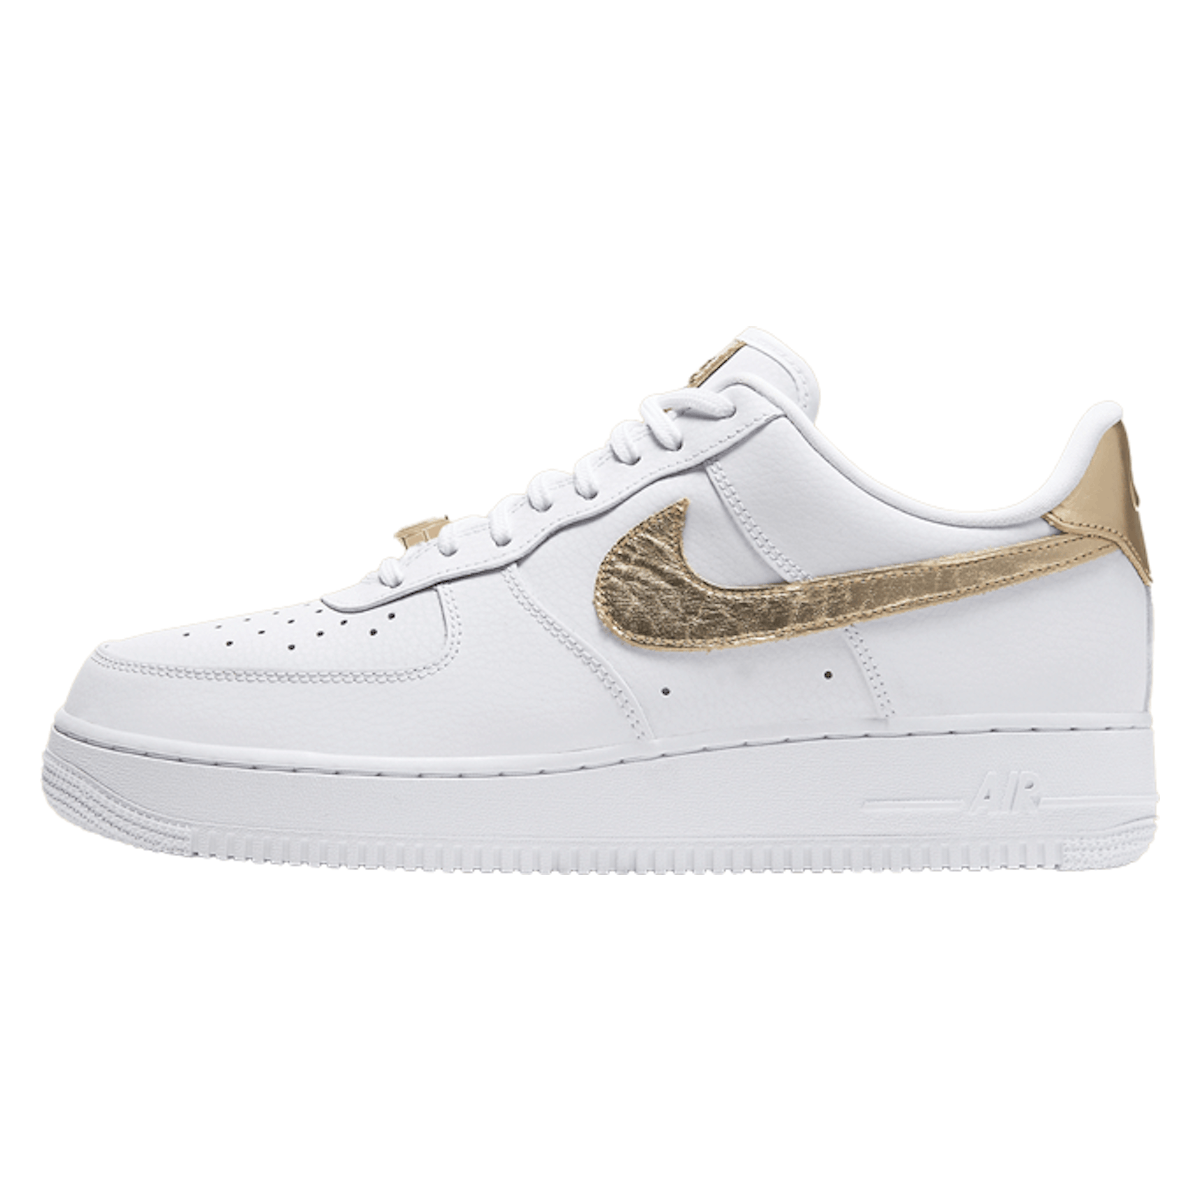 Nike Air Force 1 Low "White Gold"